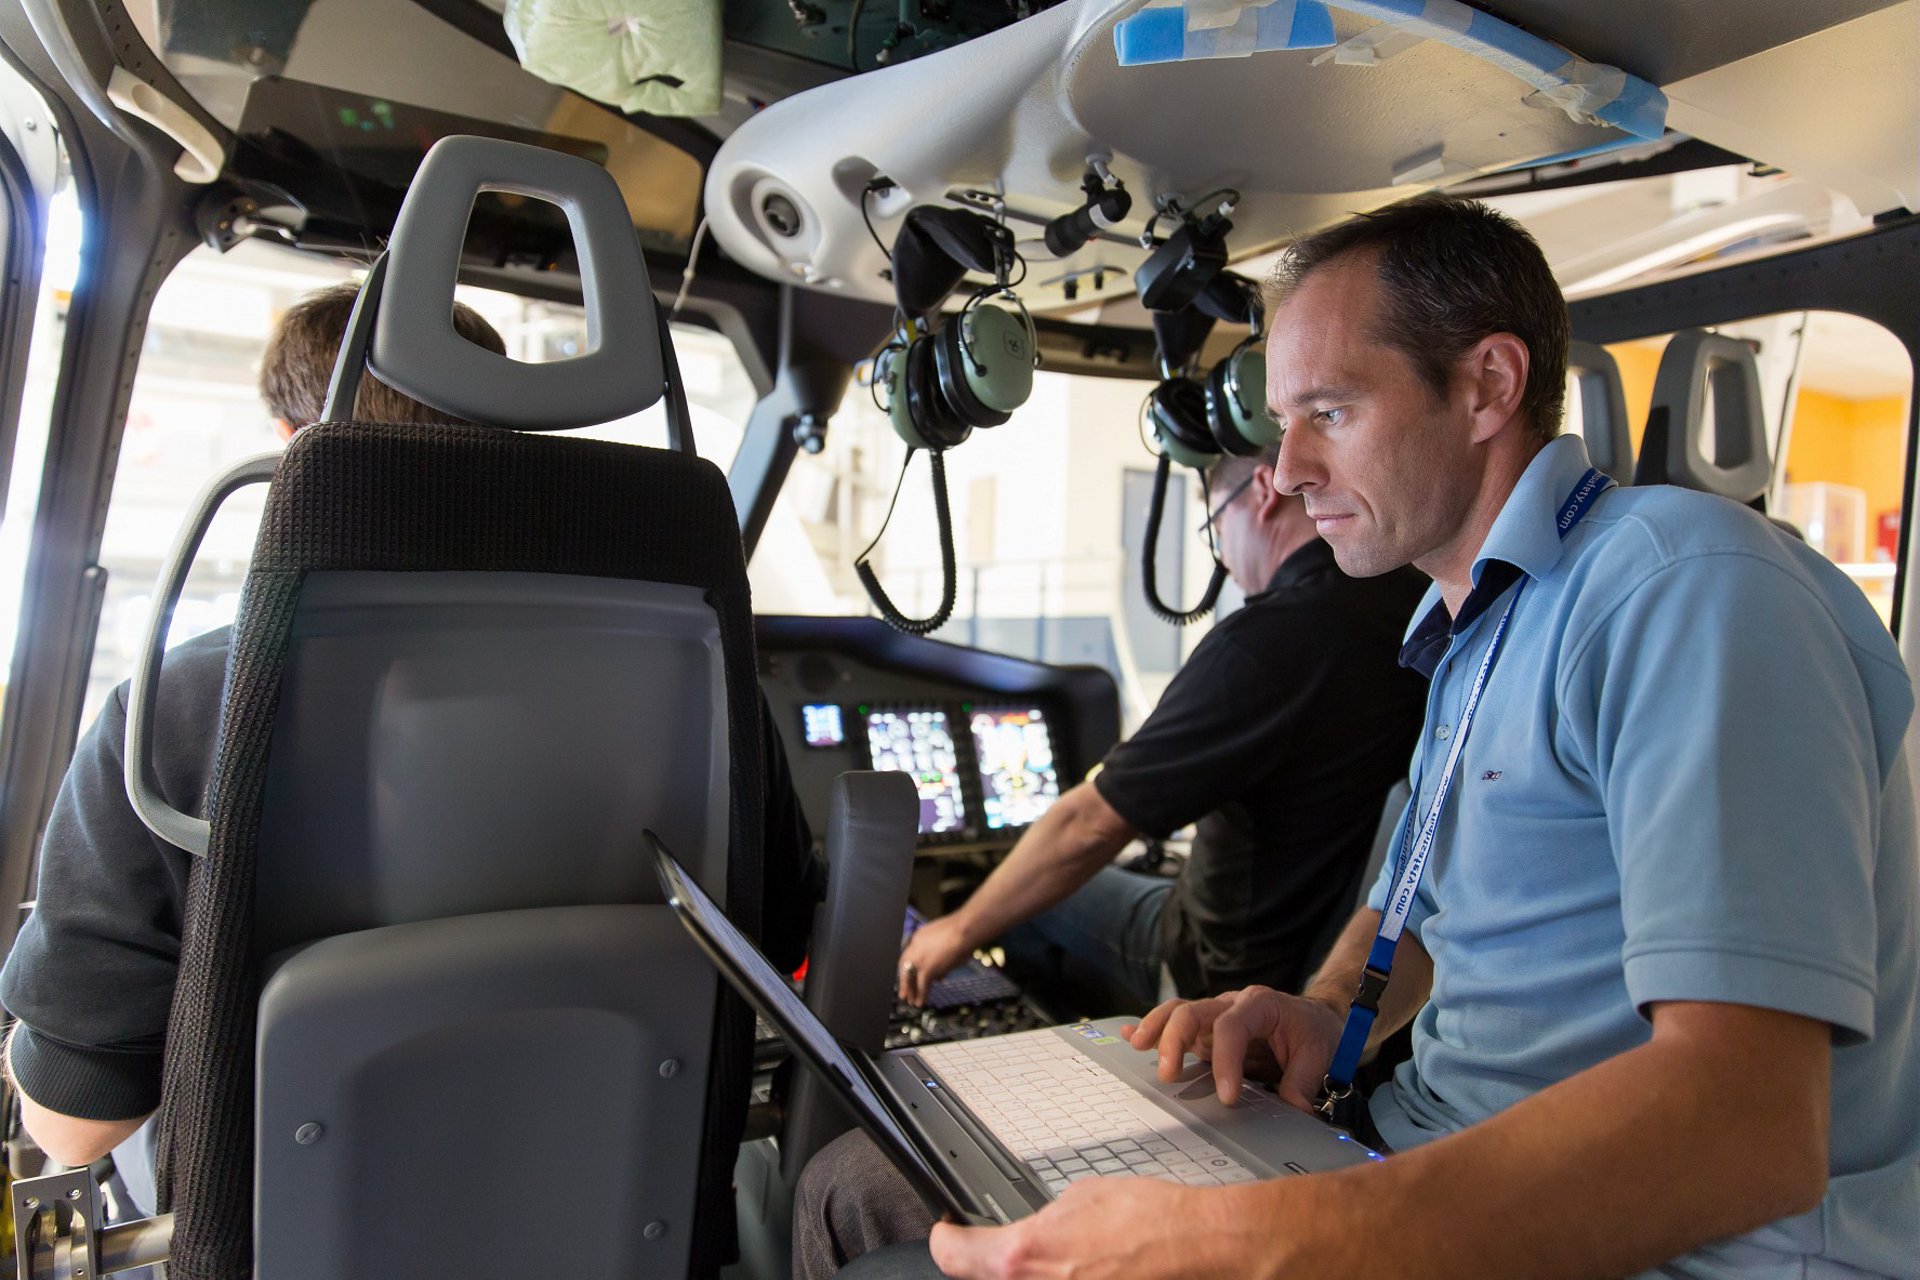 The new Training and Flight Ops offer is structured to deliver progressively sophisticated training in graduate-, master- and honors-level courses. Airbus Helicopters Photo